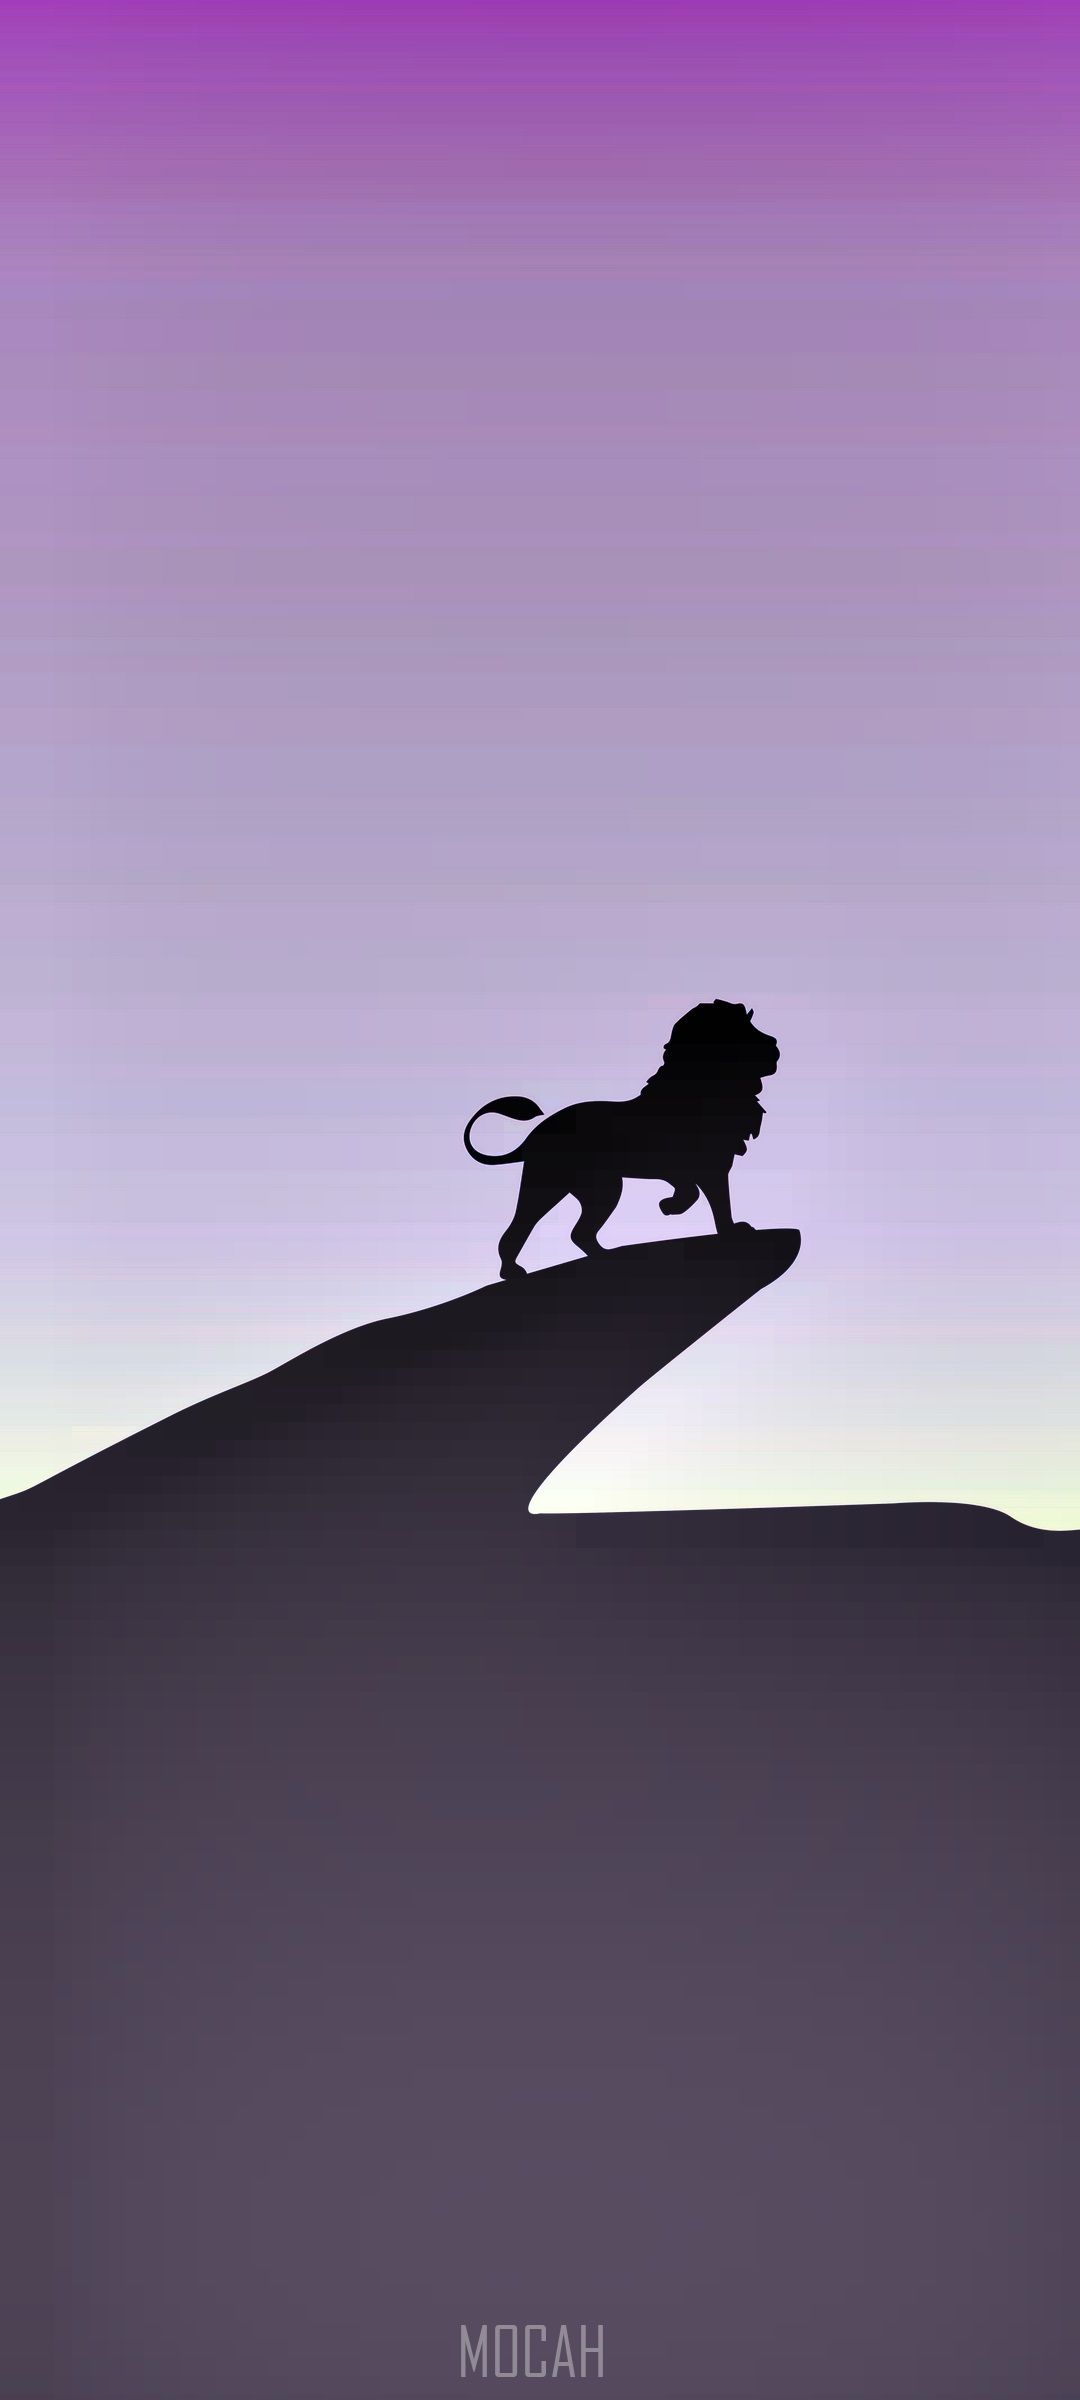 The lion king wallpaper for iPhone and Android devices - The Lion King, Leo, lion